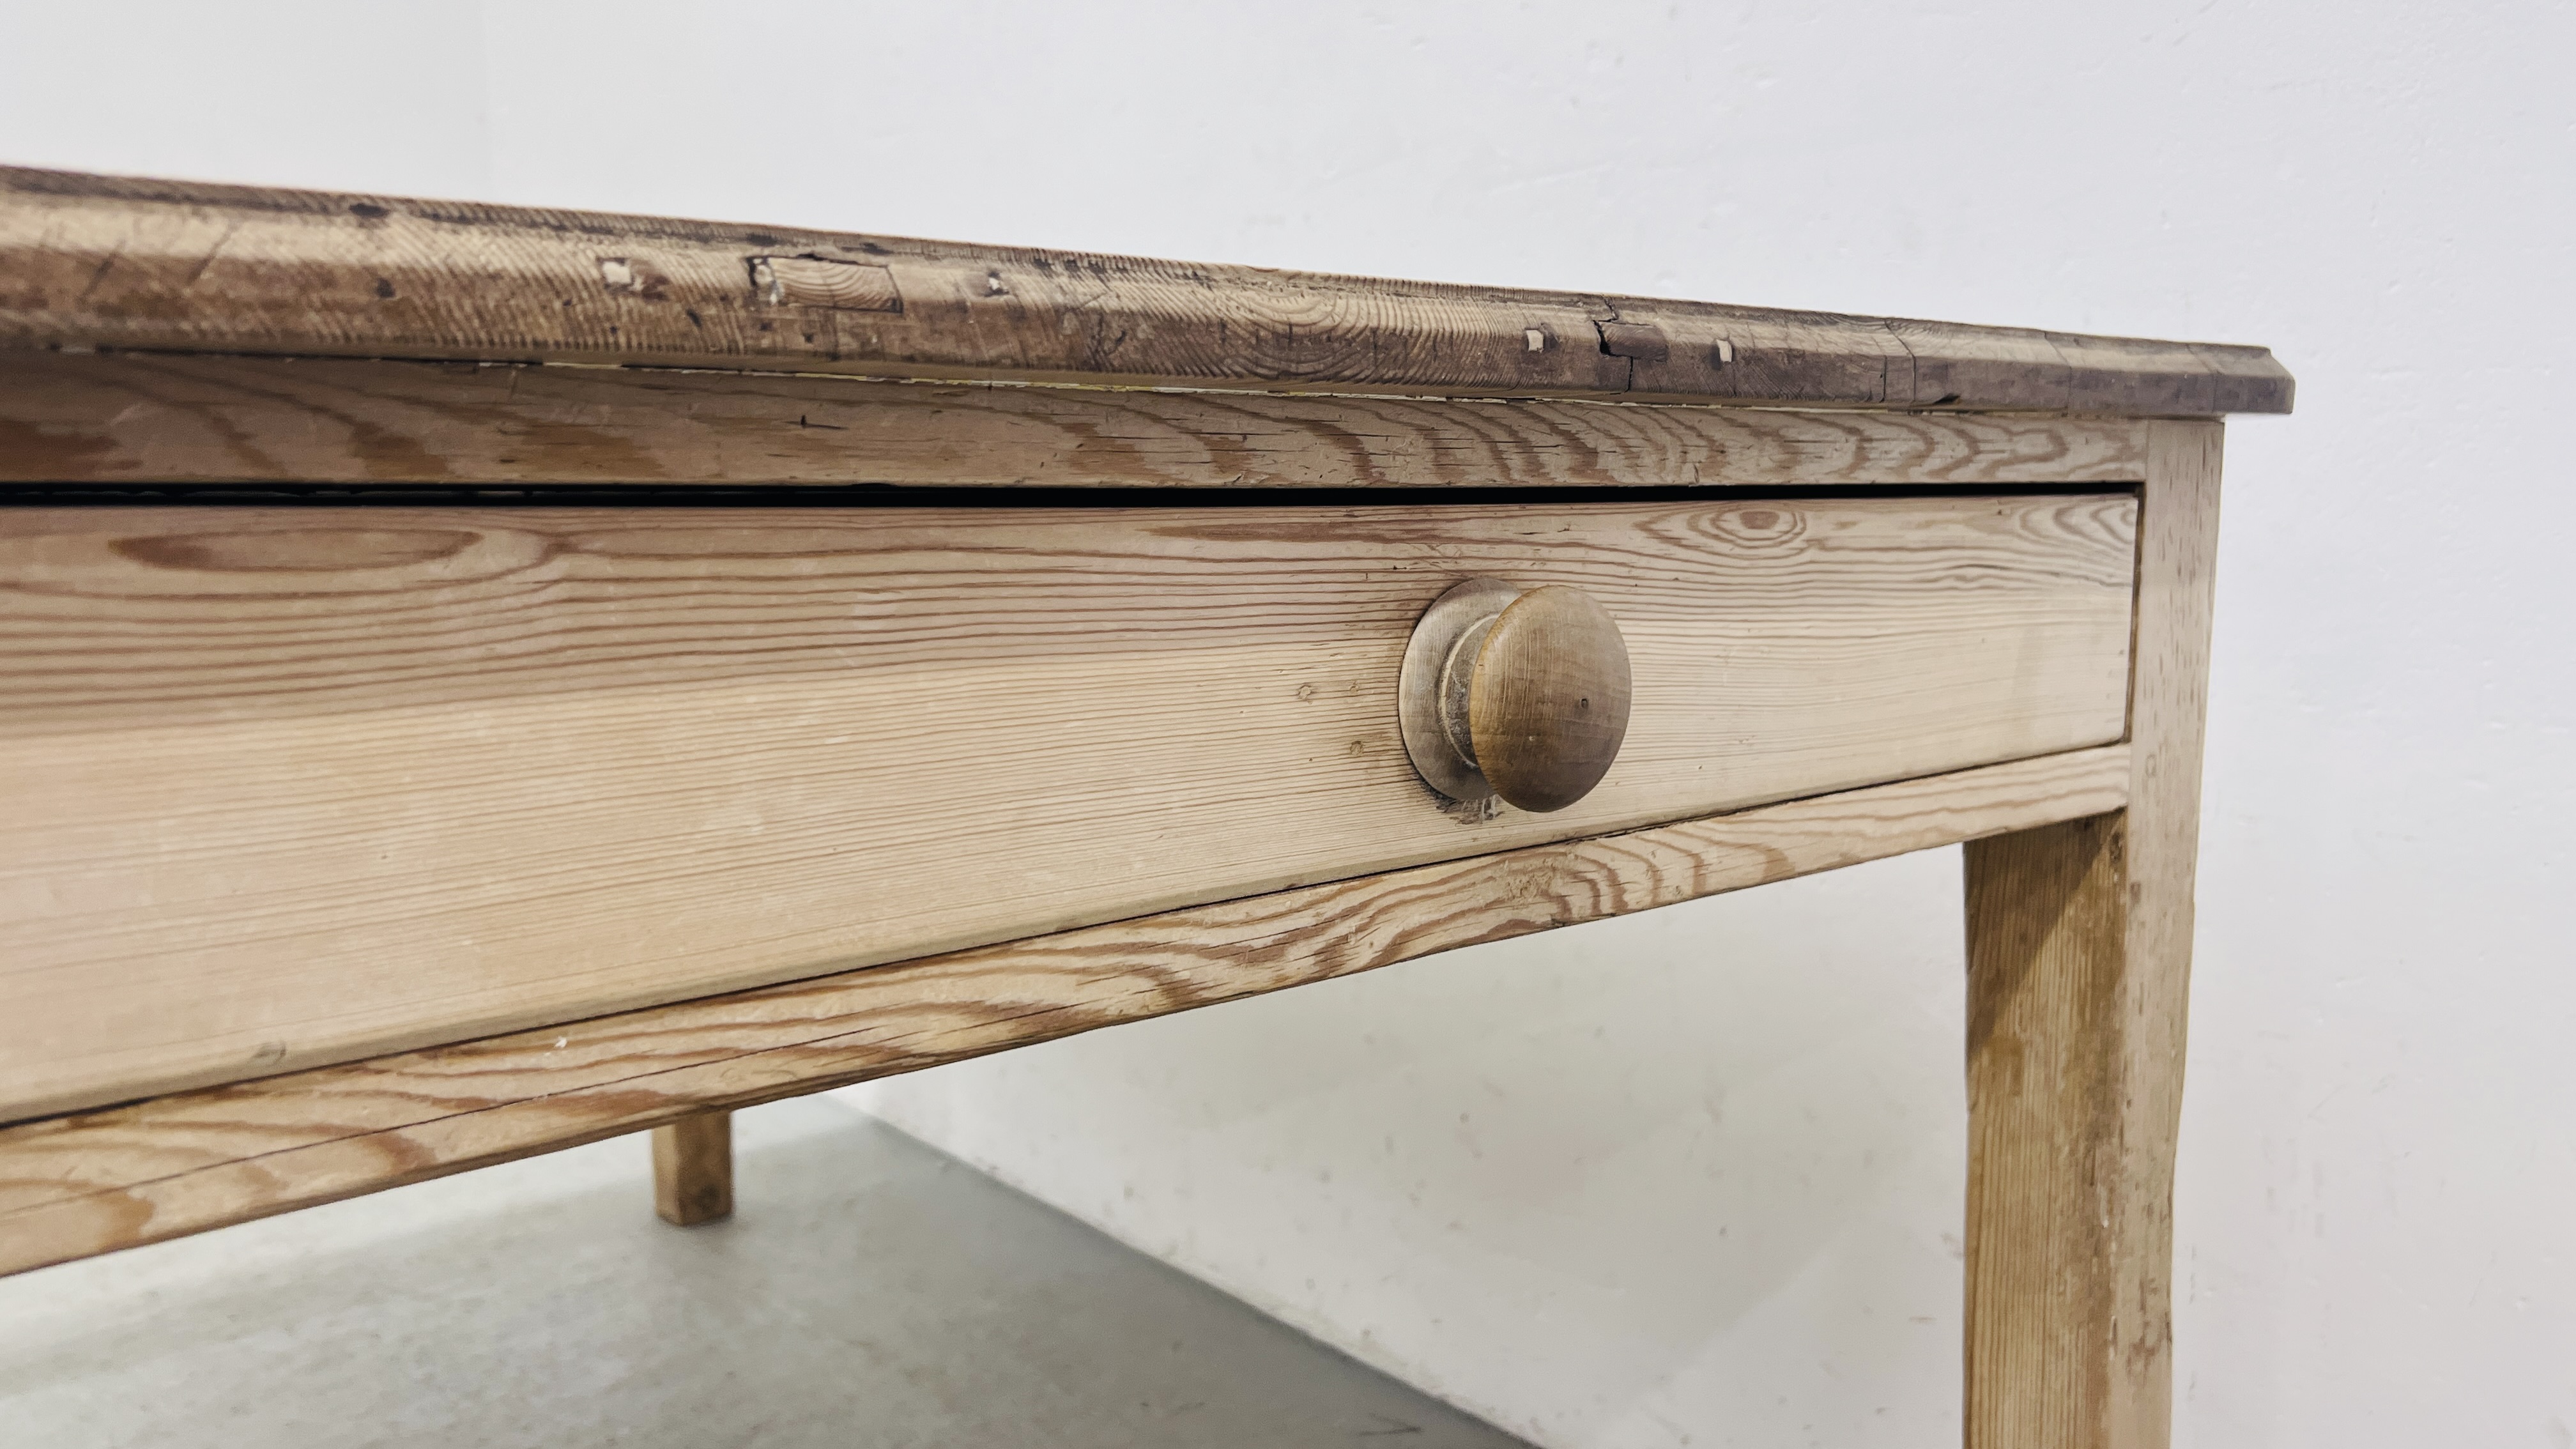 ANTIQUE WAXED PINE FARMHOUSE KITCHEN TABLE WIDTH 152CM. DEPTH 90CM. HEIGHT 77CM. - Image 5 of 11